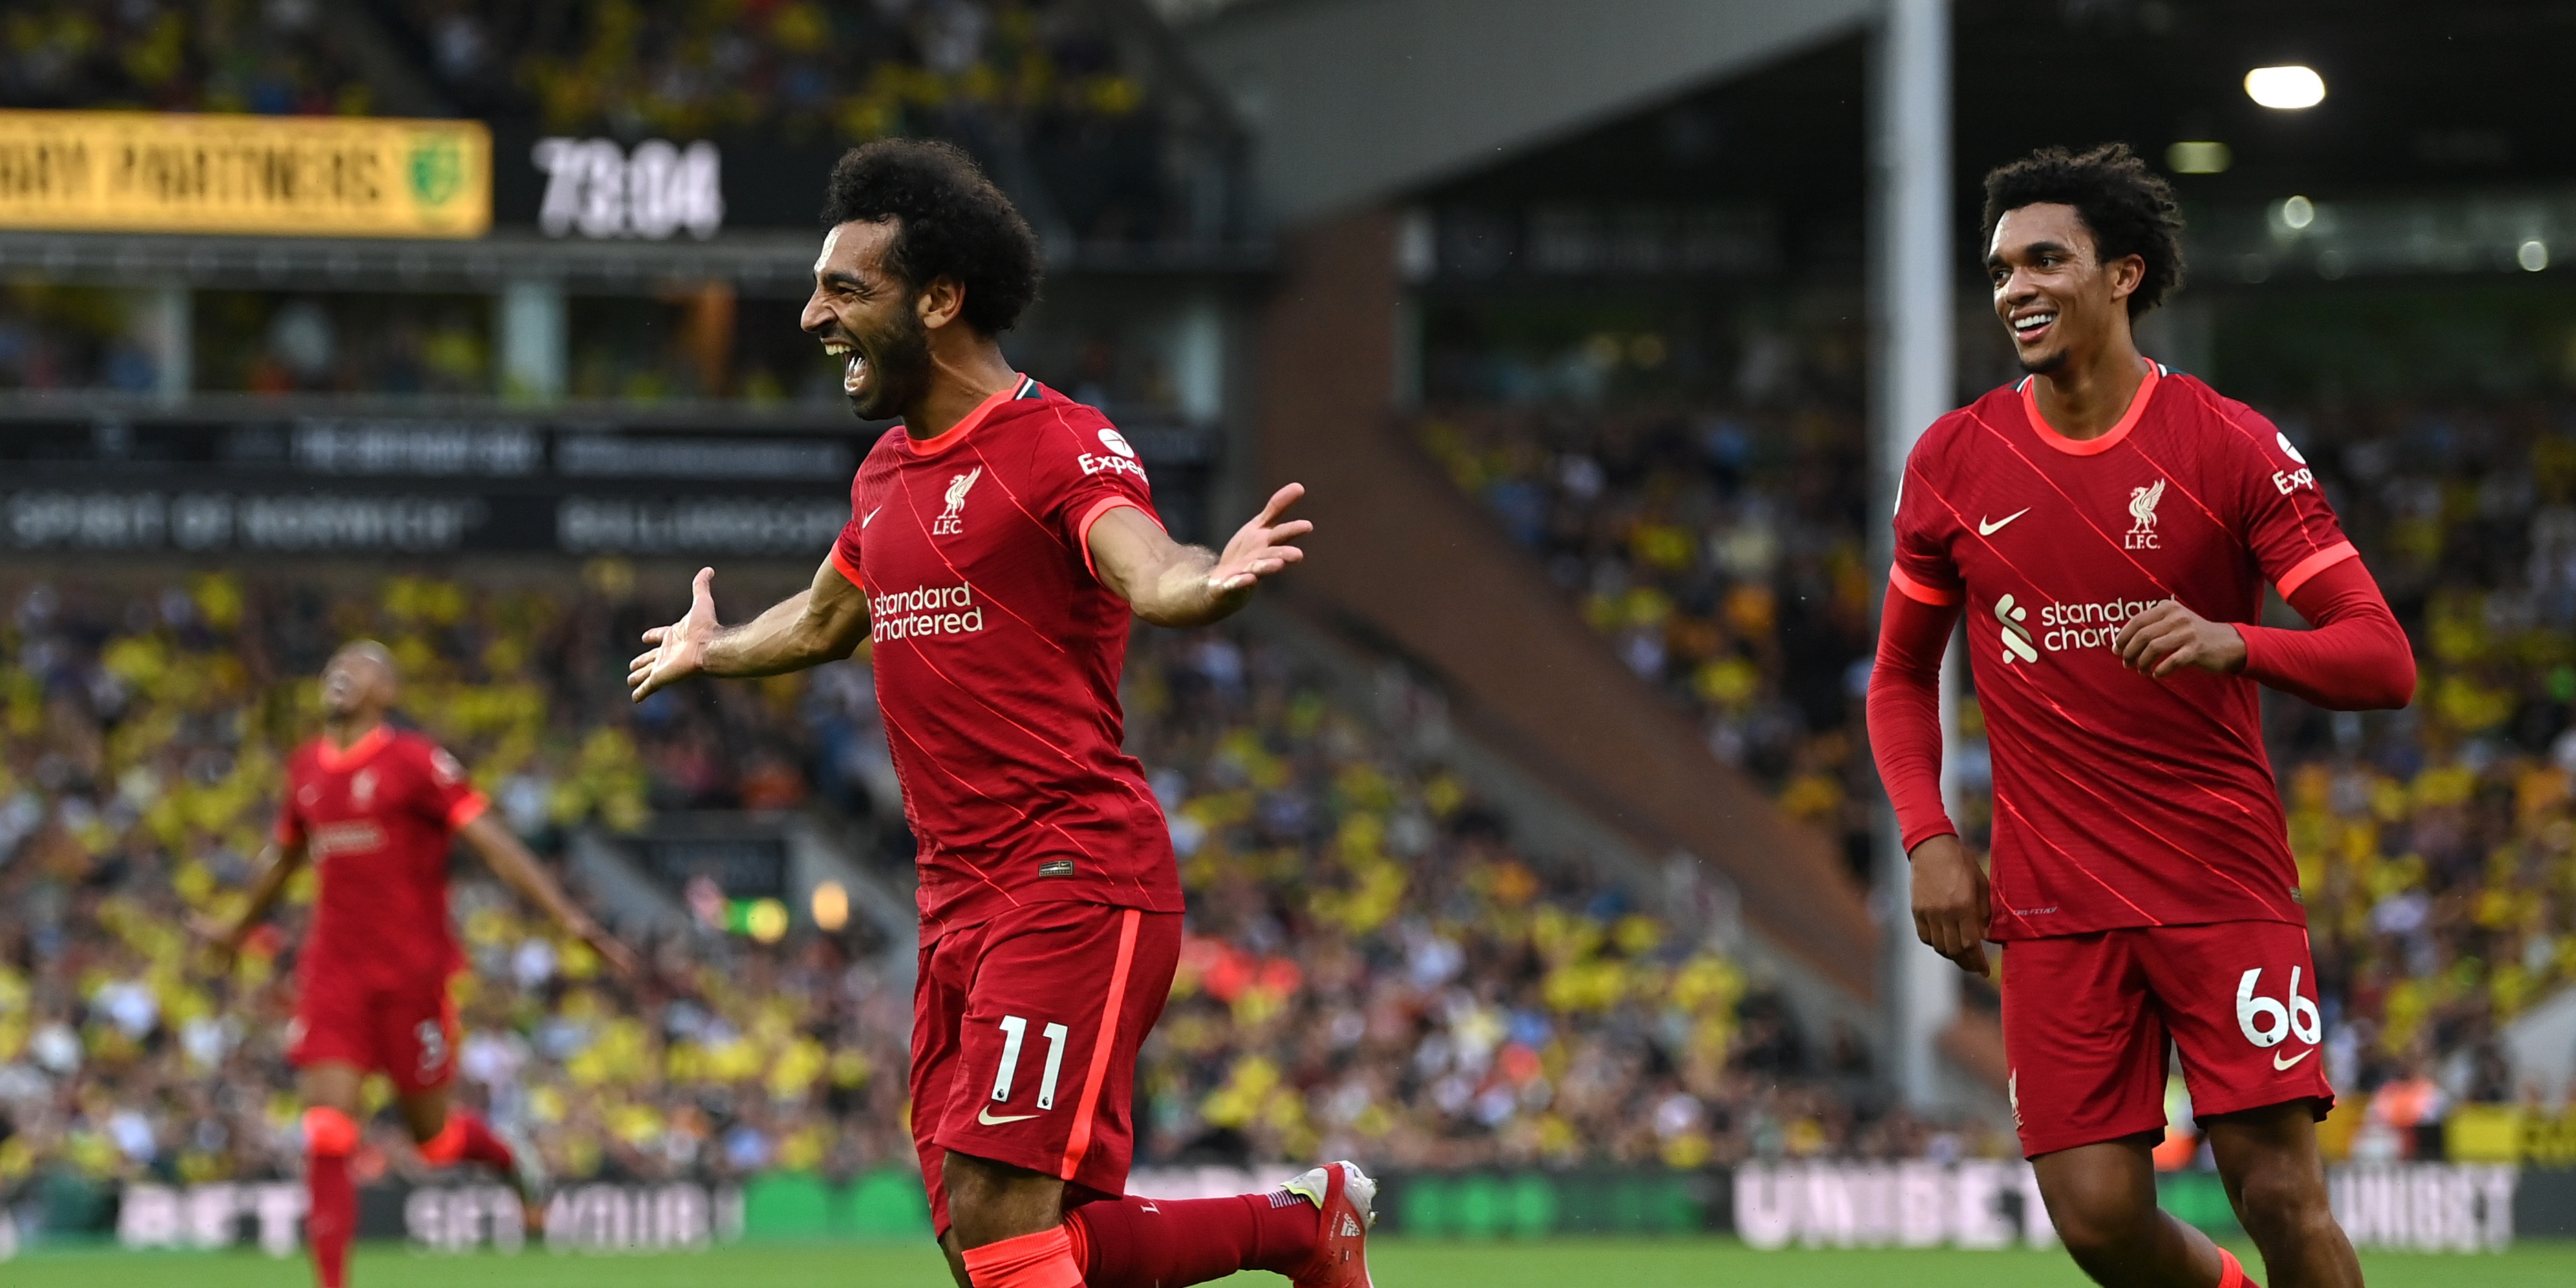 ‘Time to put your hand in your pocket’ – Paul Merson weighs in on Mo Salah’s Liverpool contract situation